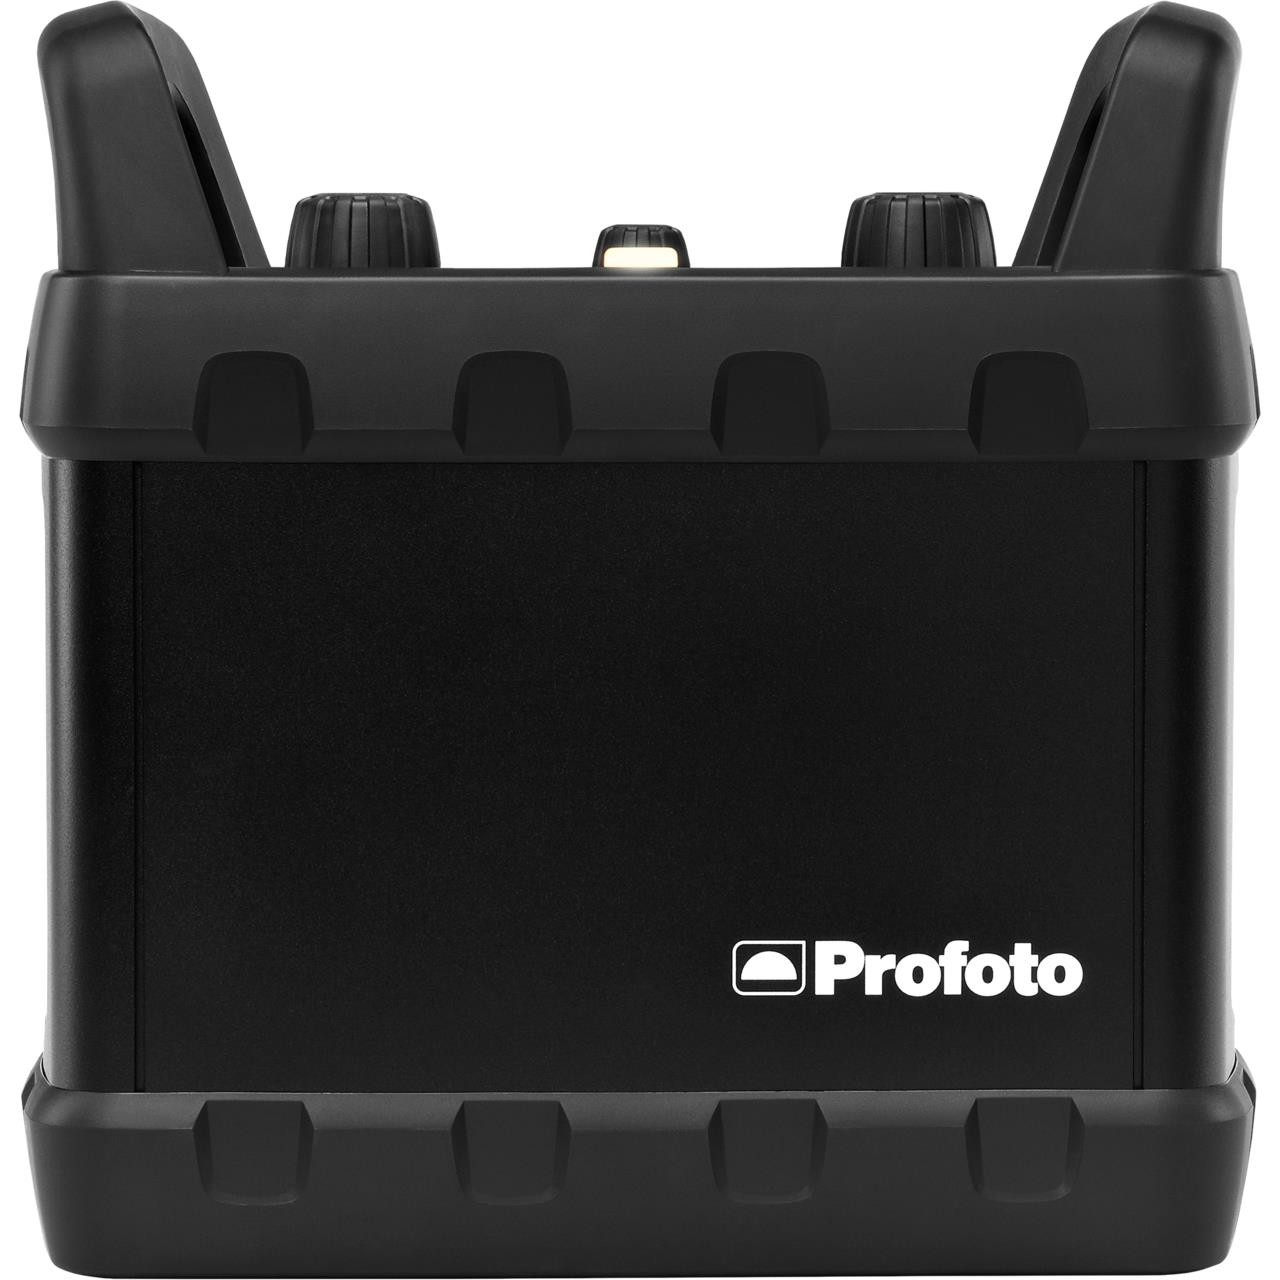 Profoto Pro-10 2400 AirTTL Power Pack, 901010